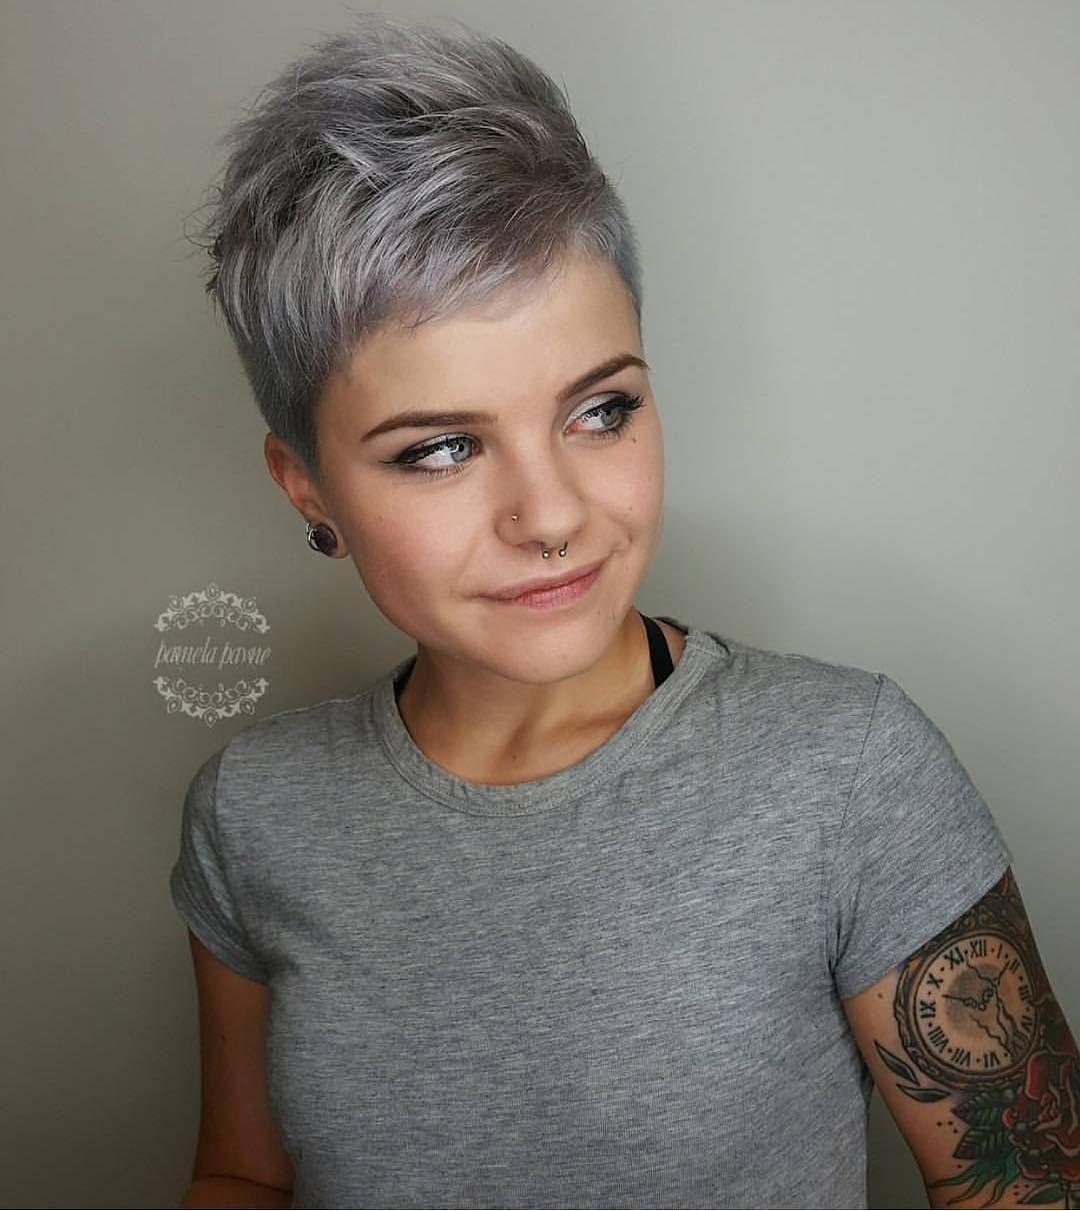 Partially Shaved Pixie Cut With Gray Coloring | Pixie Cuts regarding Short Fine Gray Hair Styles